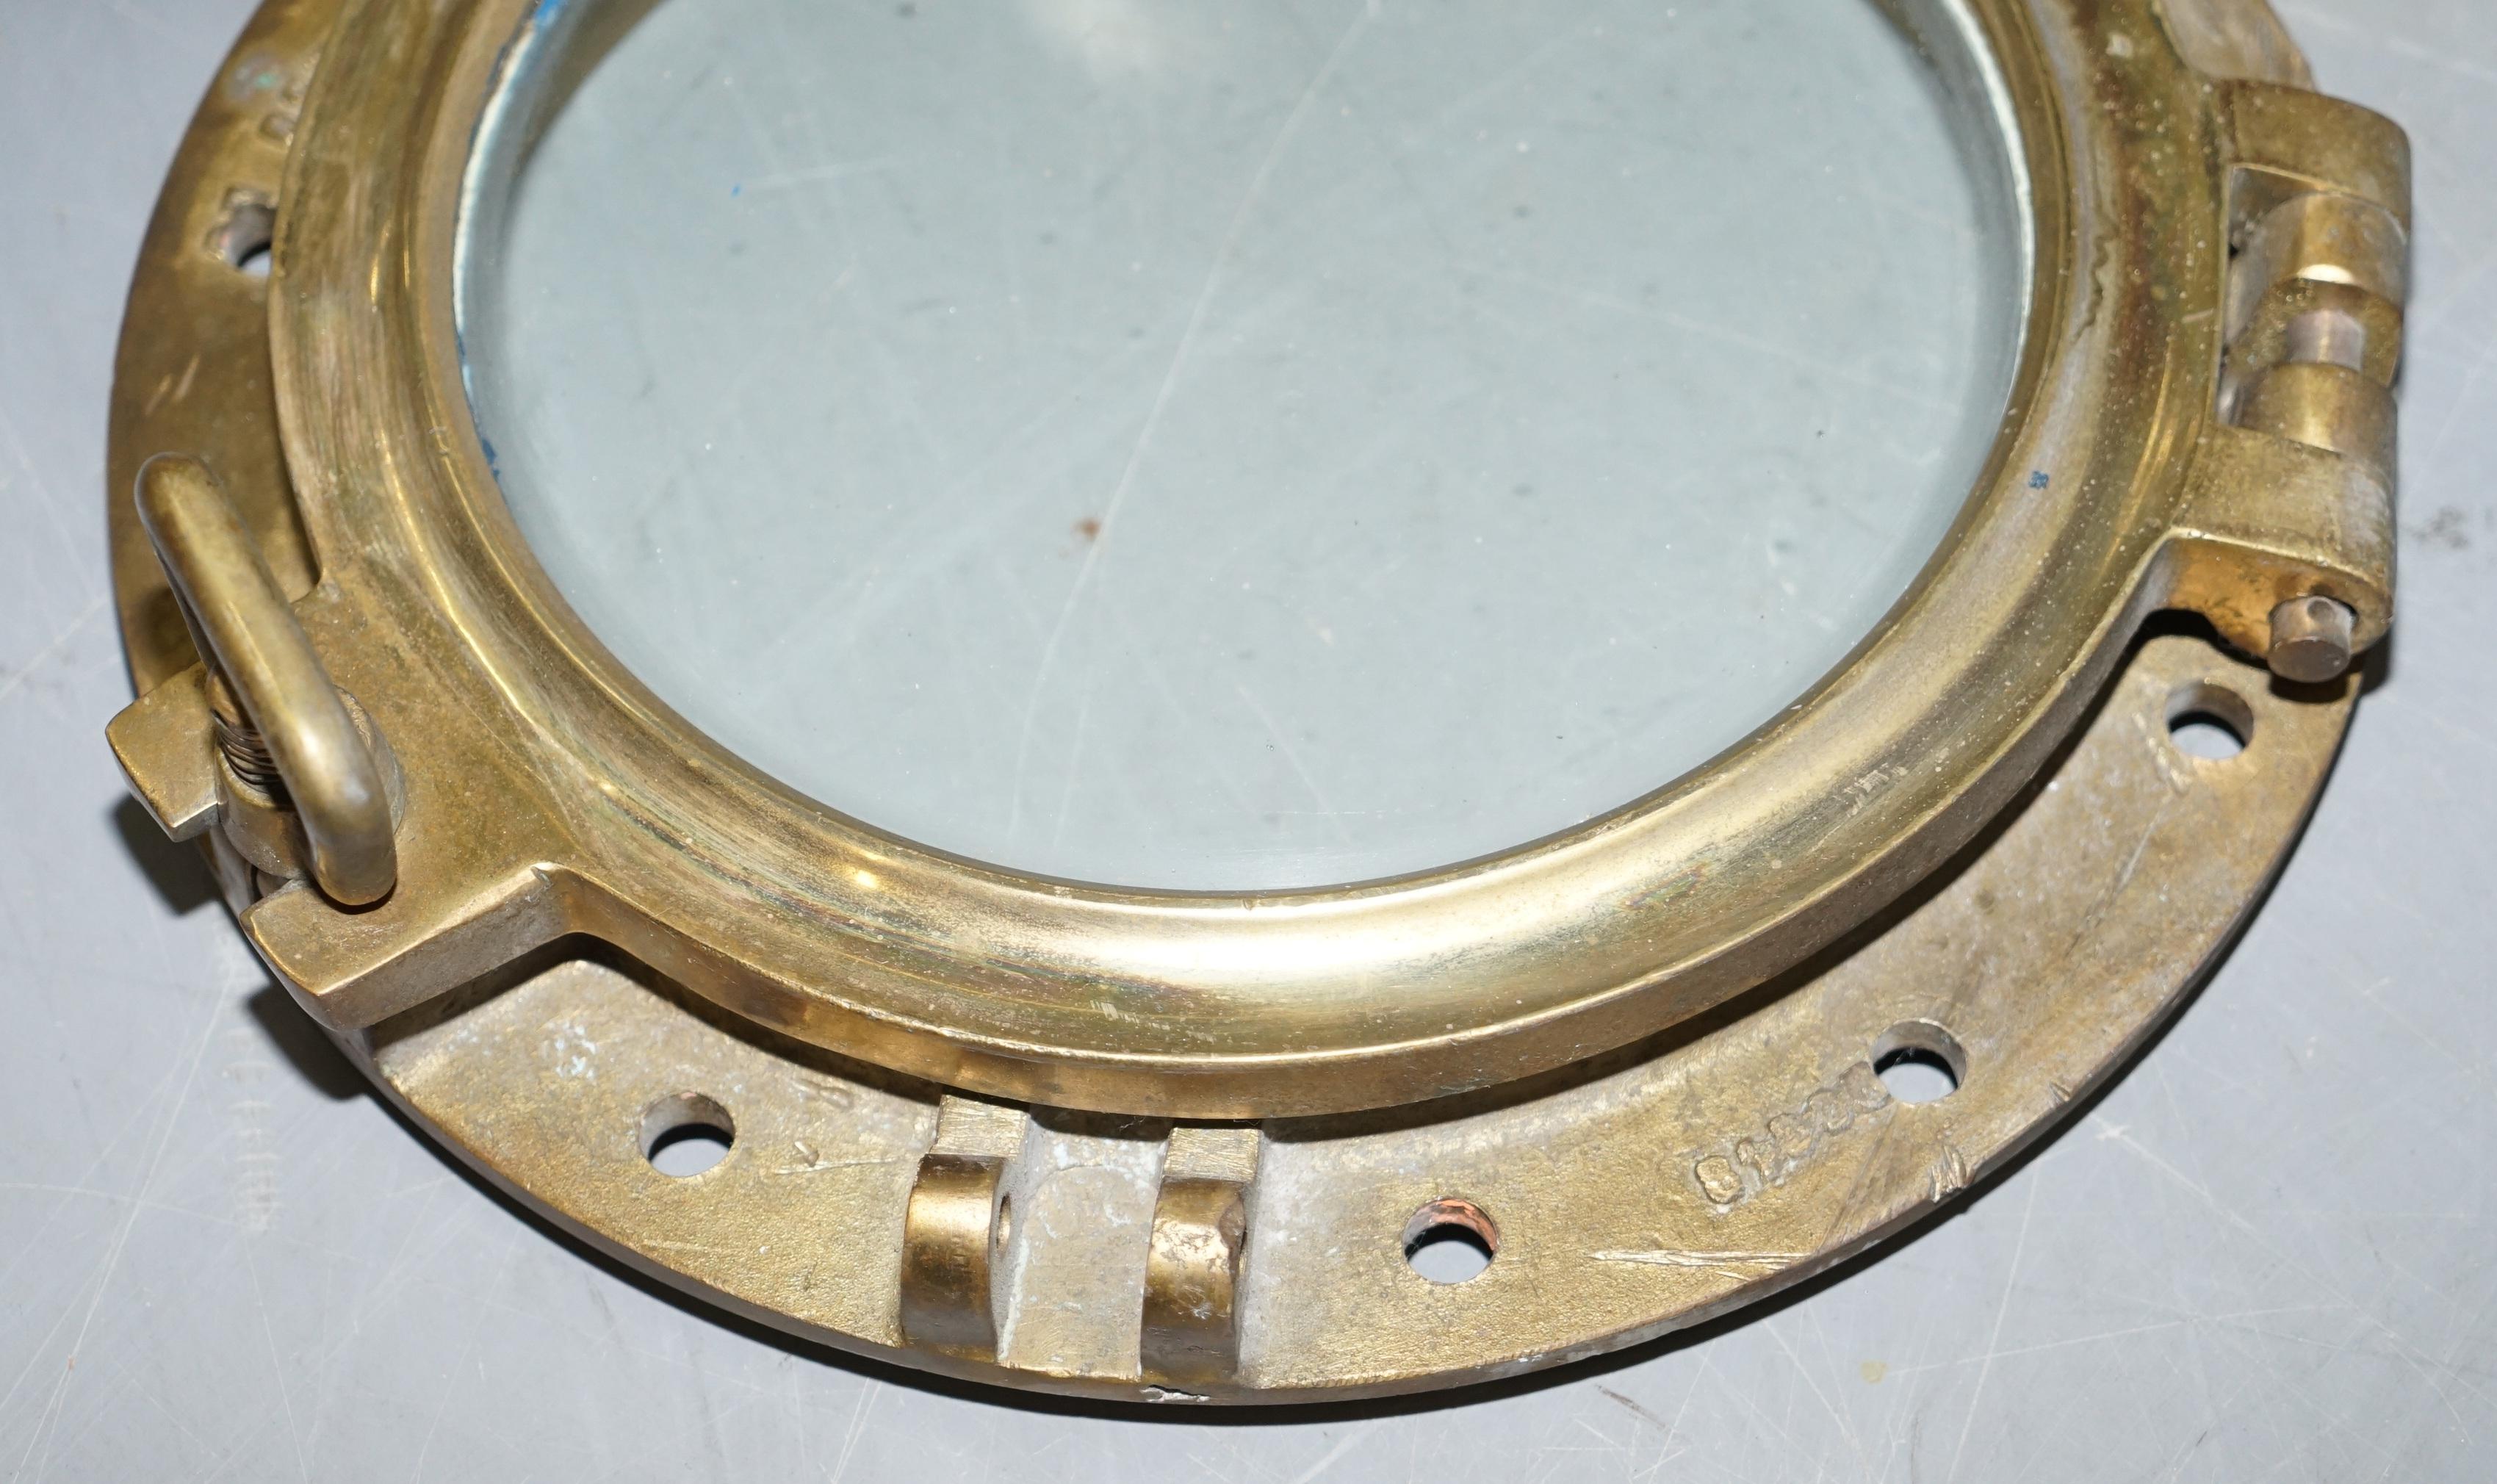 Hand-Crafted 3 Original Antique 1890 Stamped Solid Brass Military Nautical Porthole Windows